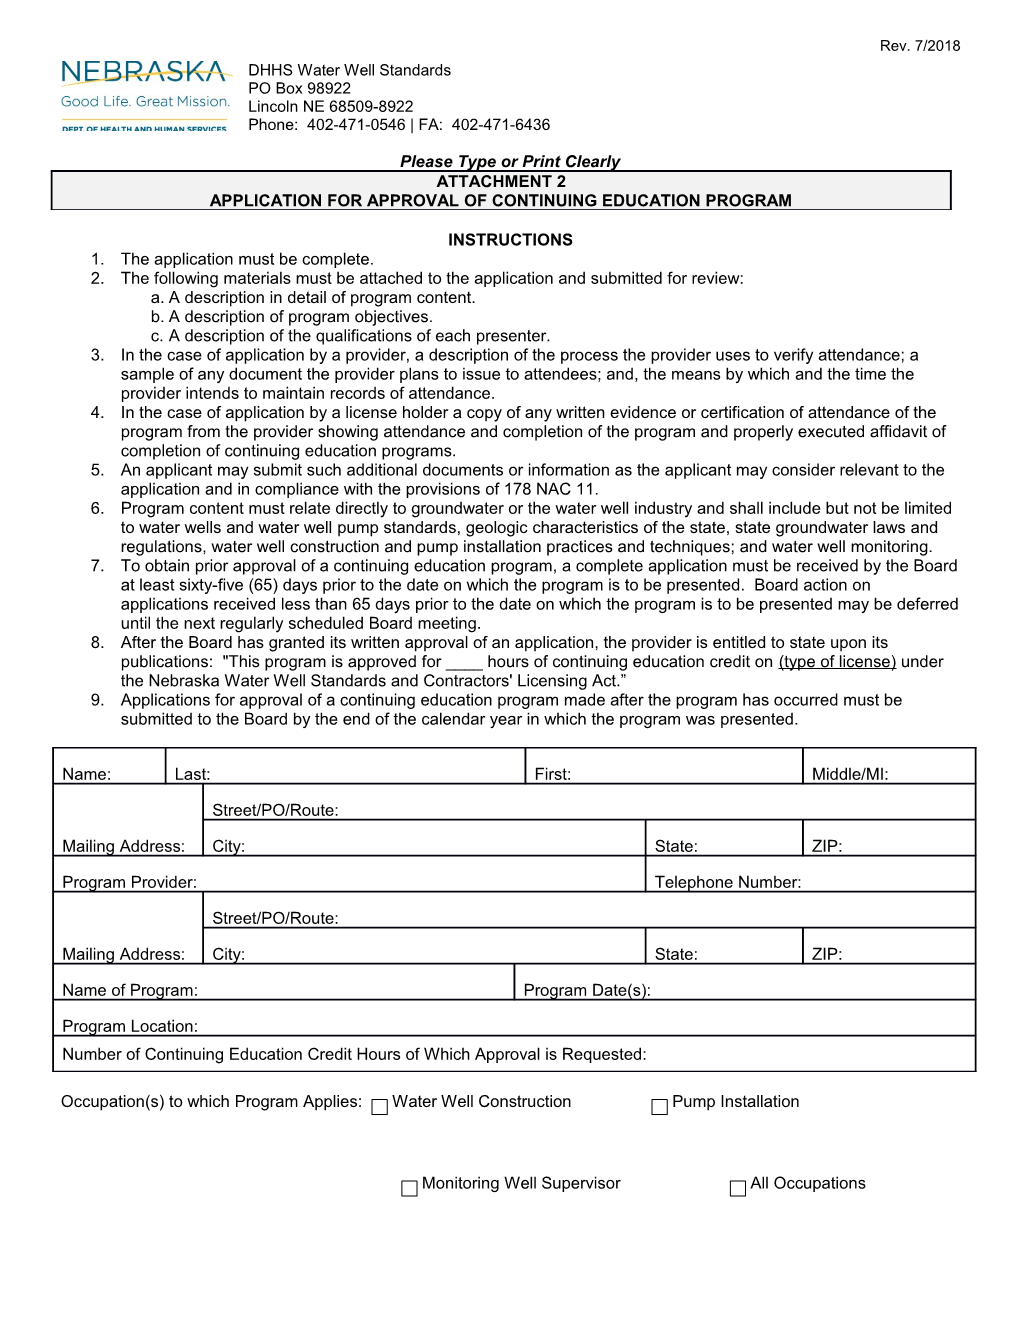 Application for Approval of Continuing Education Program